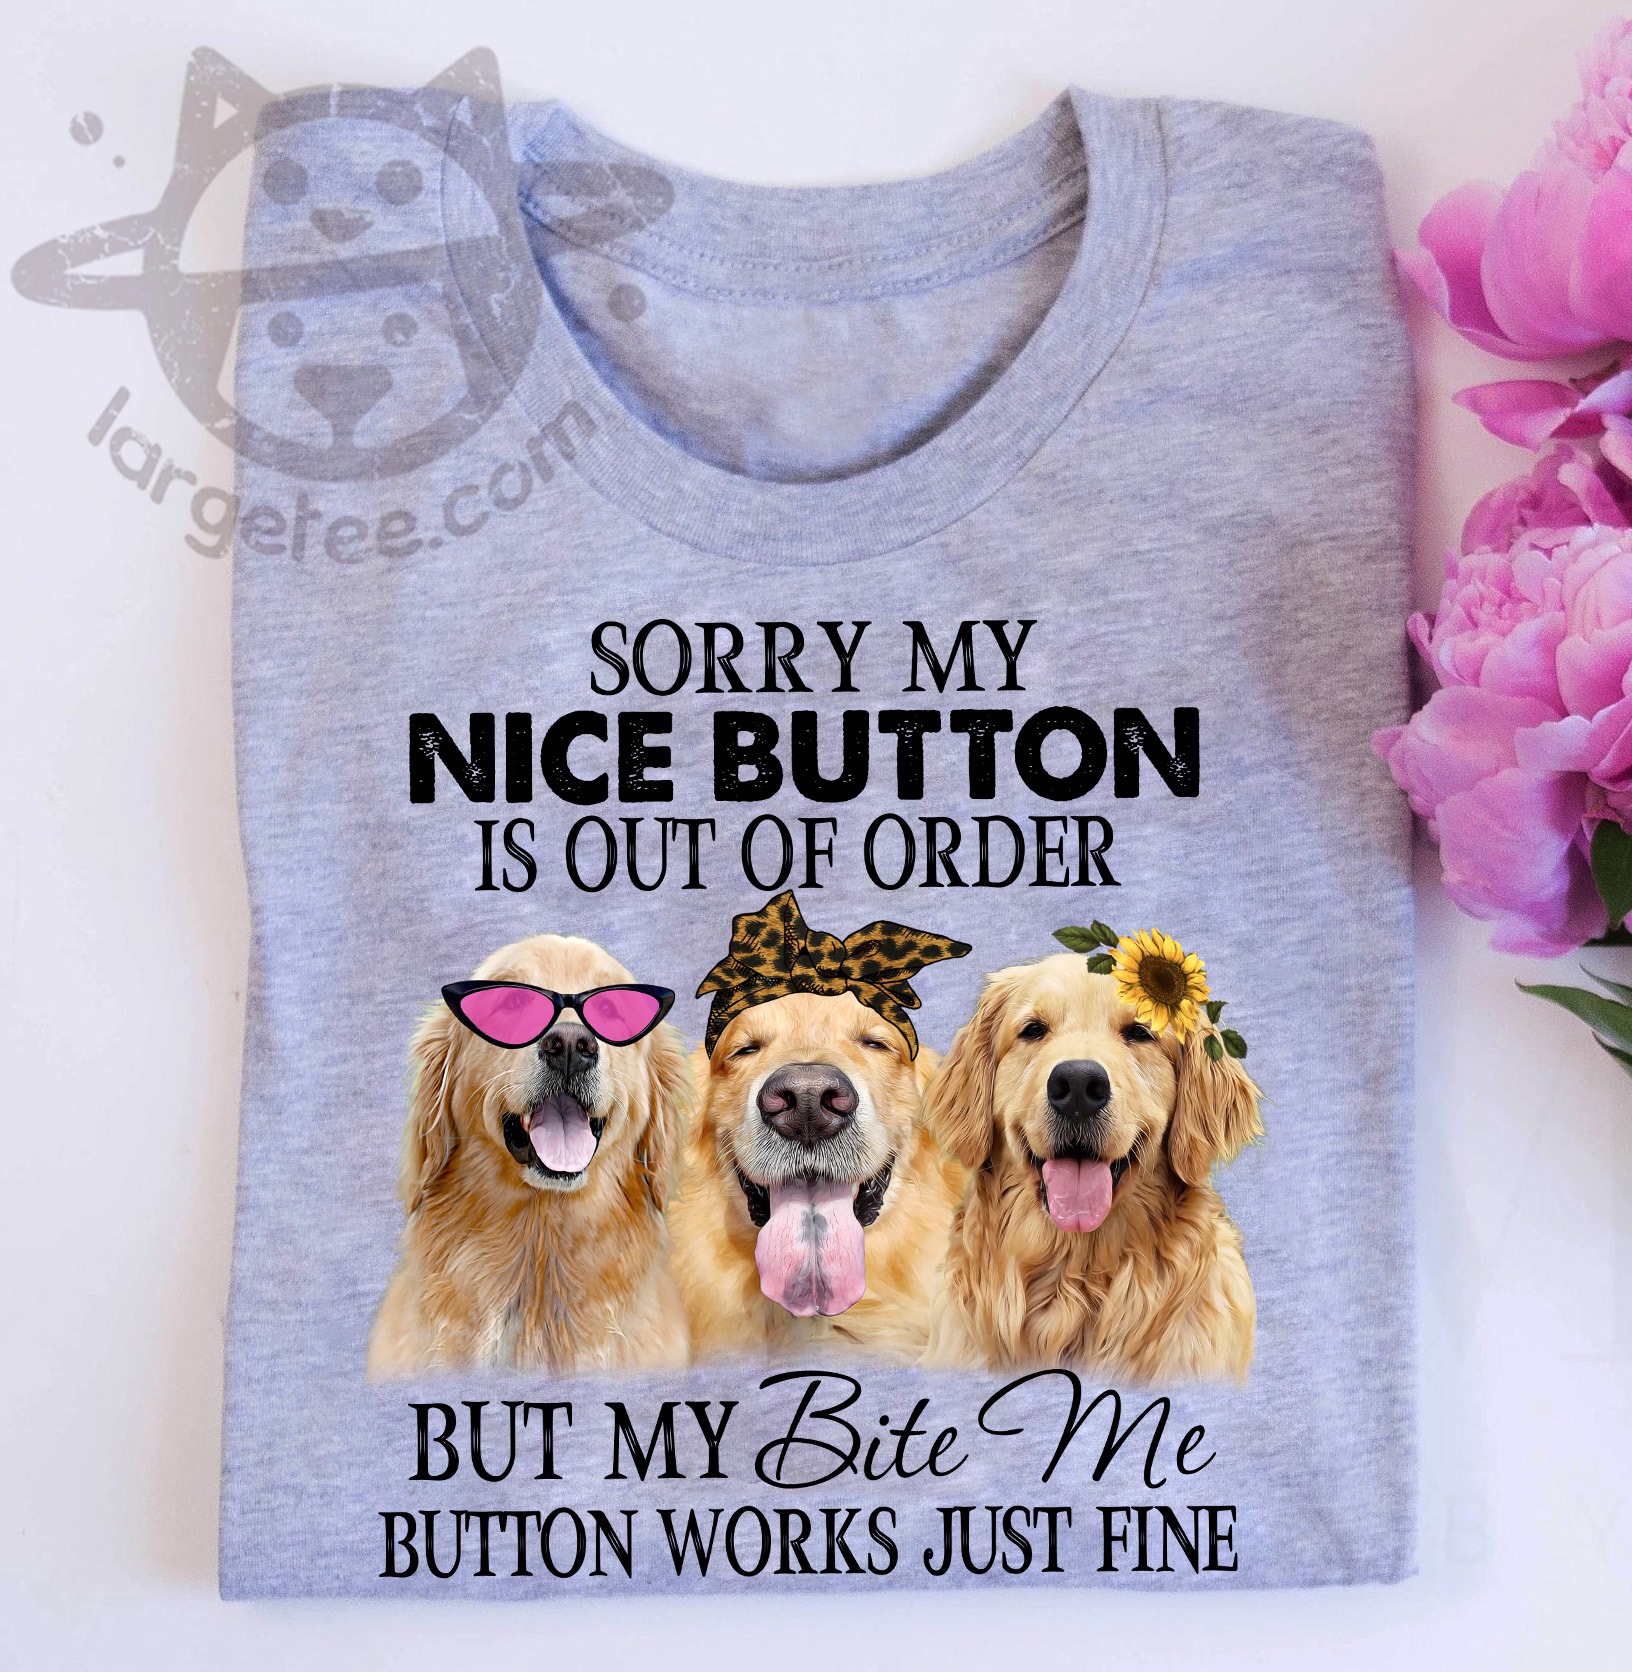 Sorry my nice button is out of order but my bite me button works just fine - Golden dog